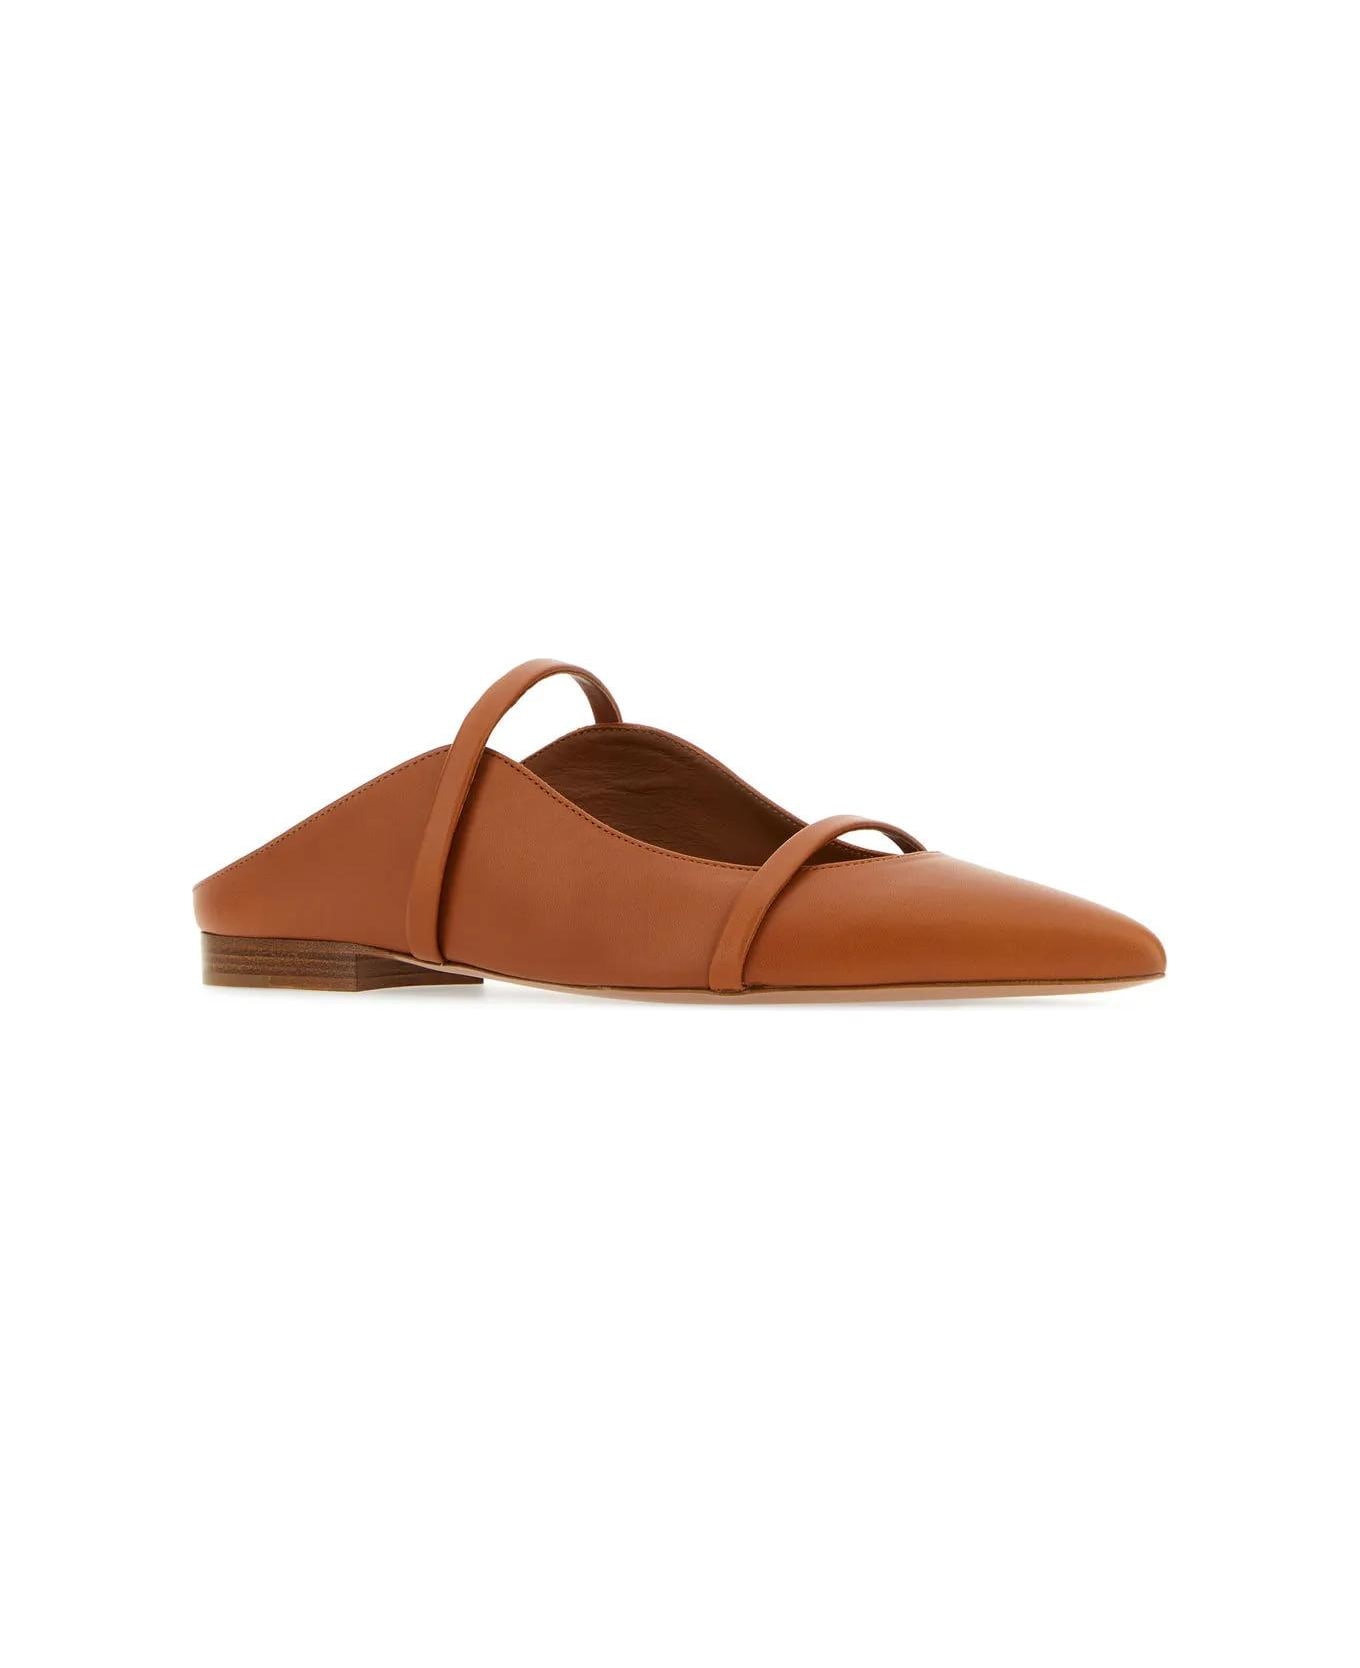 Malone Souliers Caramel Nappa Leather Maureen Flat Slippers - Brown フラットシューズ